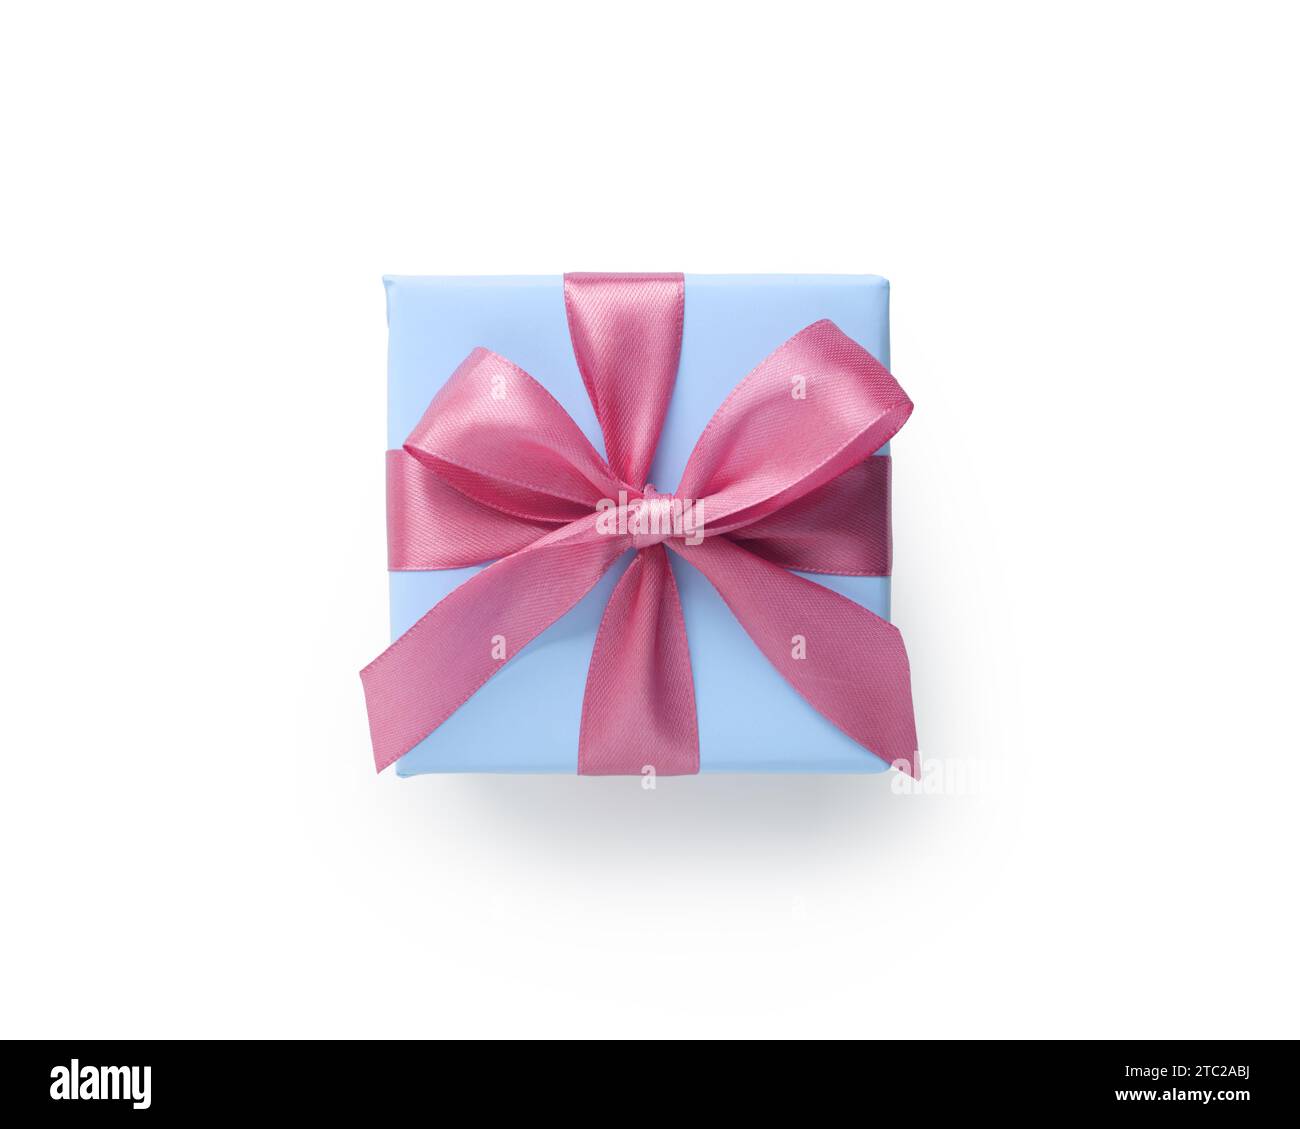 Top view of blue gift box with pink ribbon bow isolated on white background, directly above Stock Photo